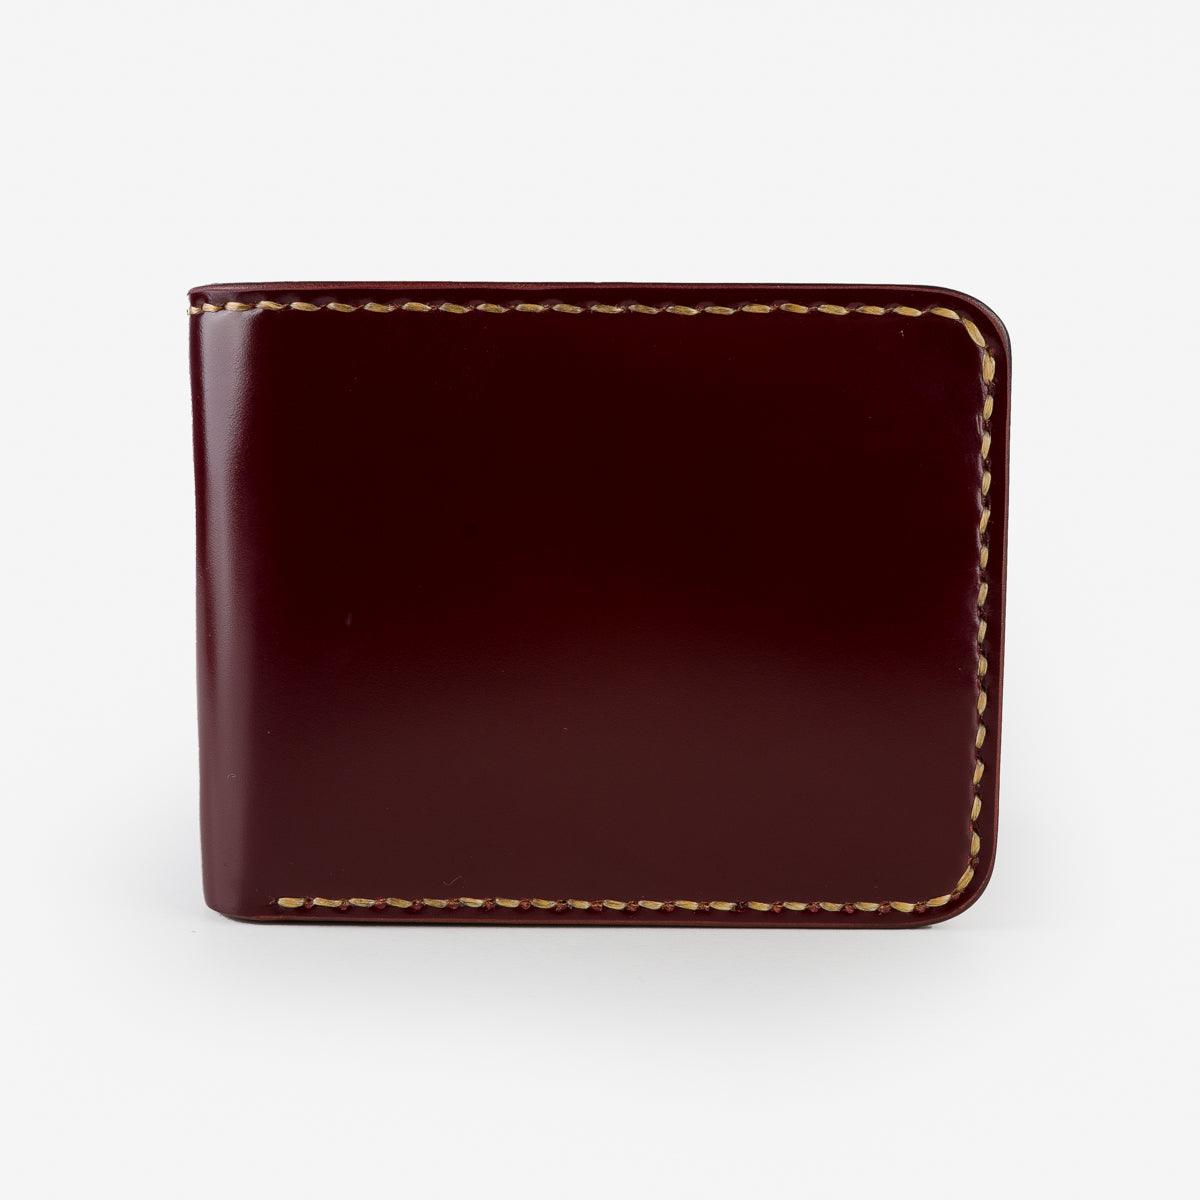 Image showing the IHG-071-OXB - Slimline Small Shell Cordovan Wallet Oxblood which is a WALLETS AND CHAINS described by the following info Accessories, IHSALE_M23, Iron Heart, Released, WALLETS AND CHAINS and sold on the IRON HEART GERMANY online store